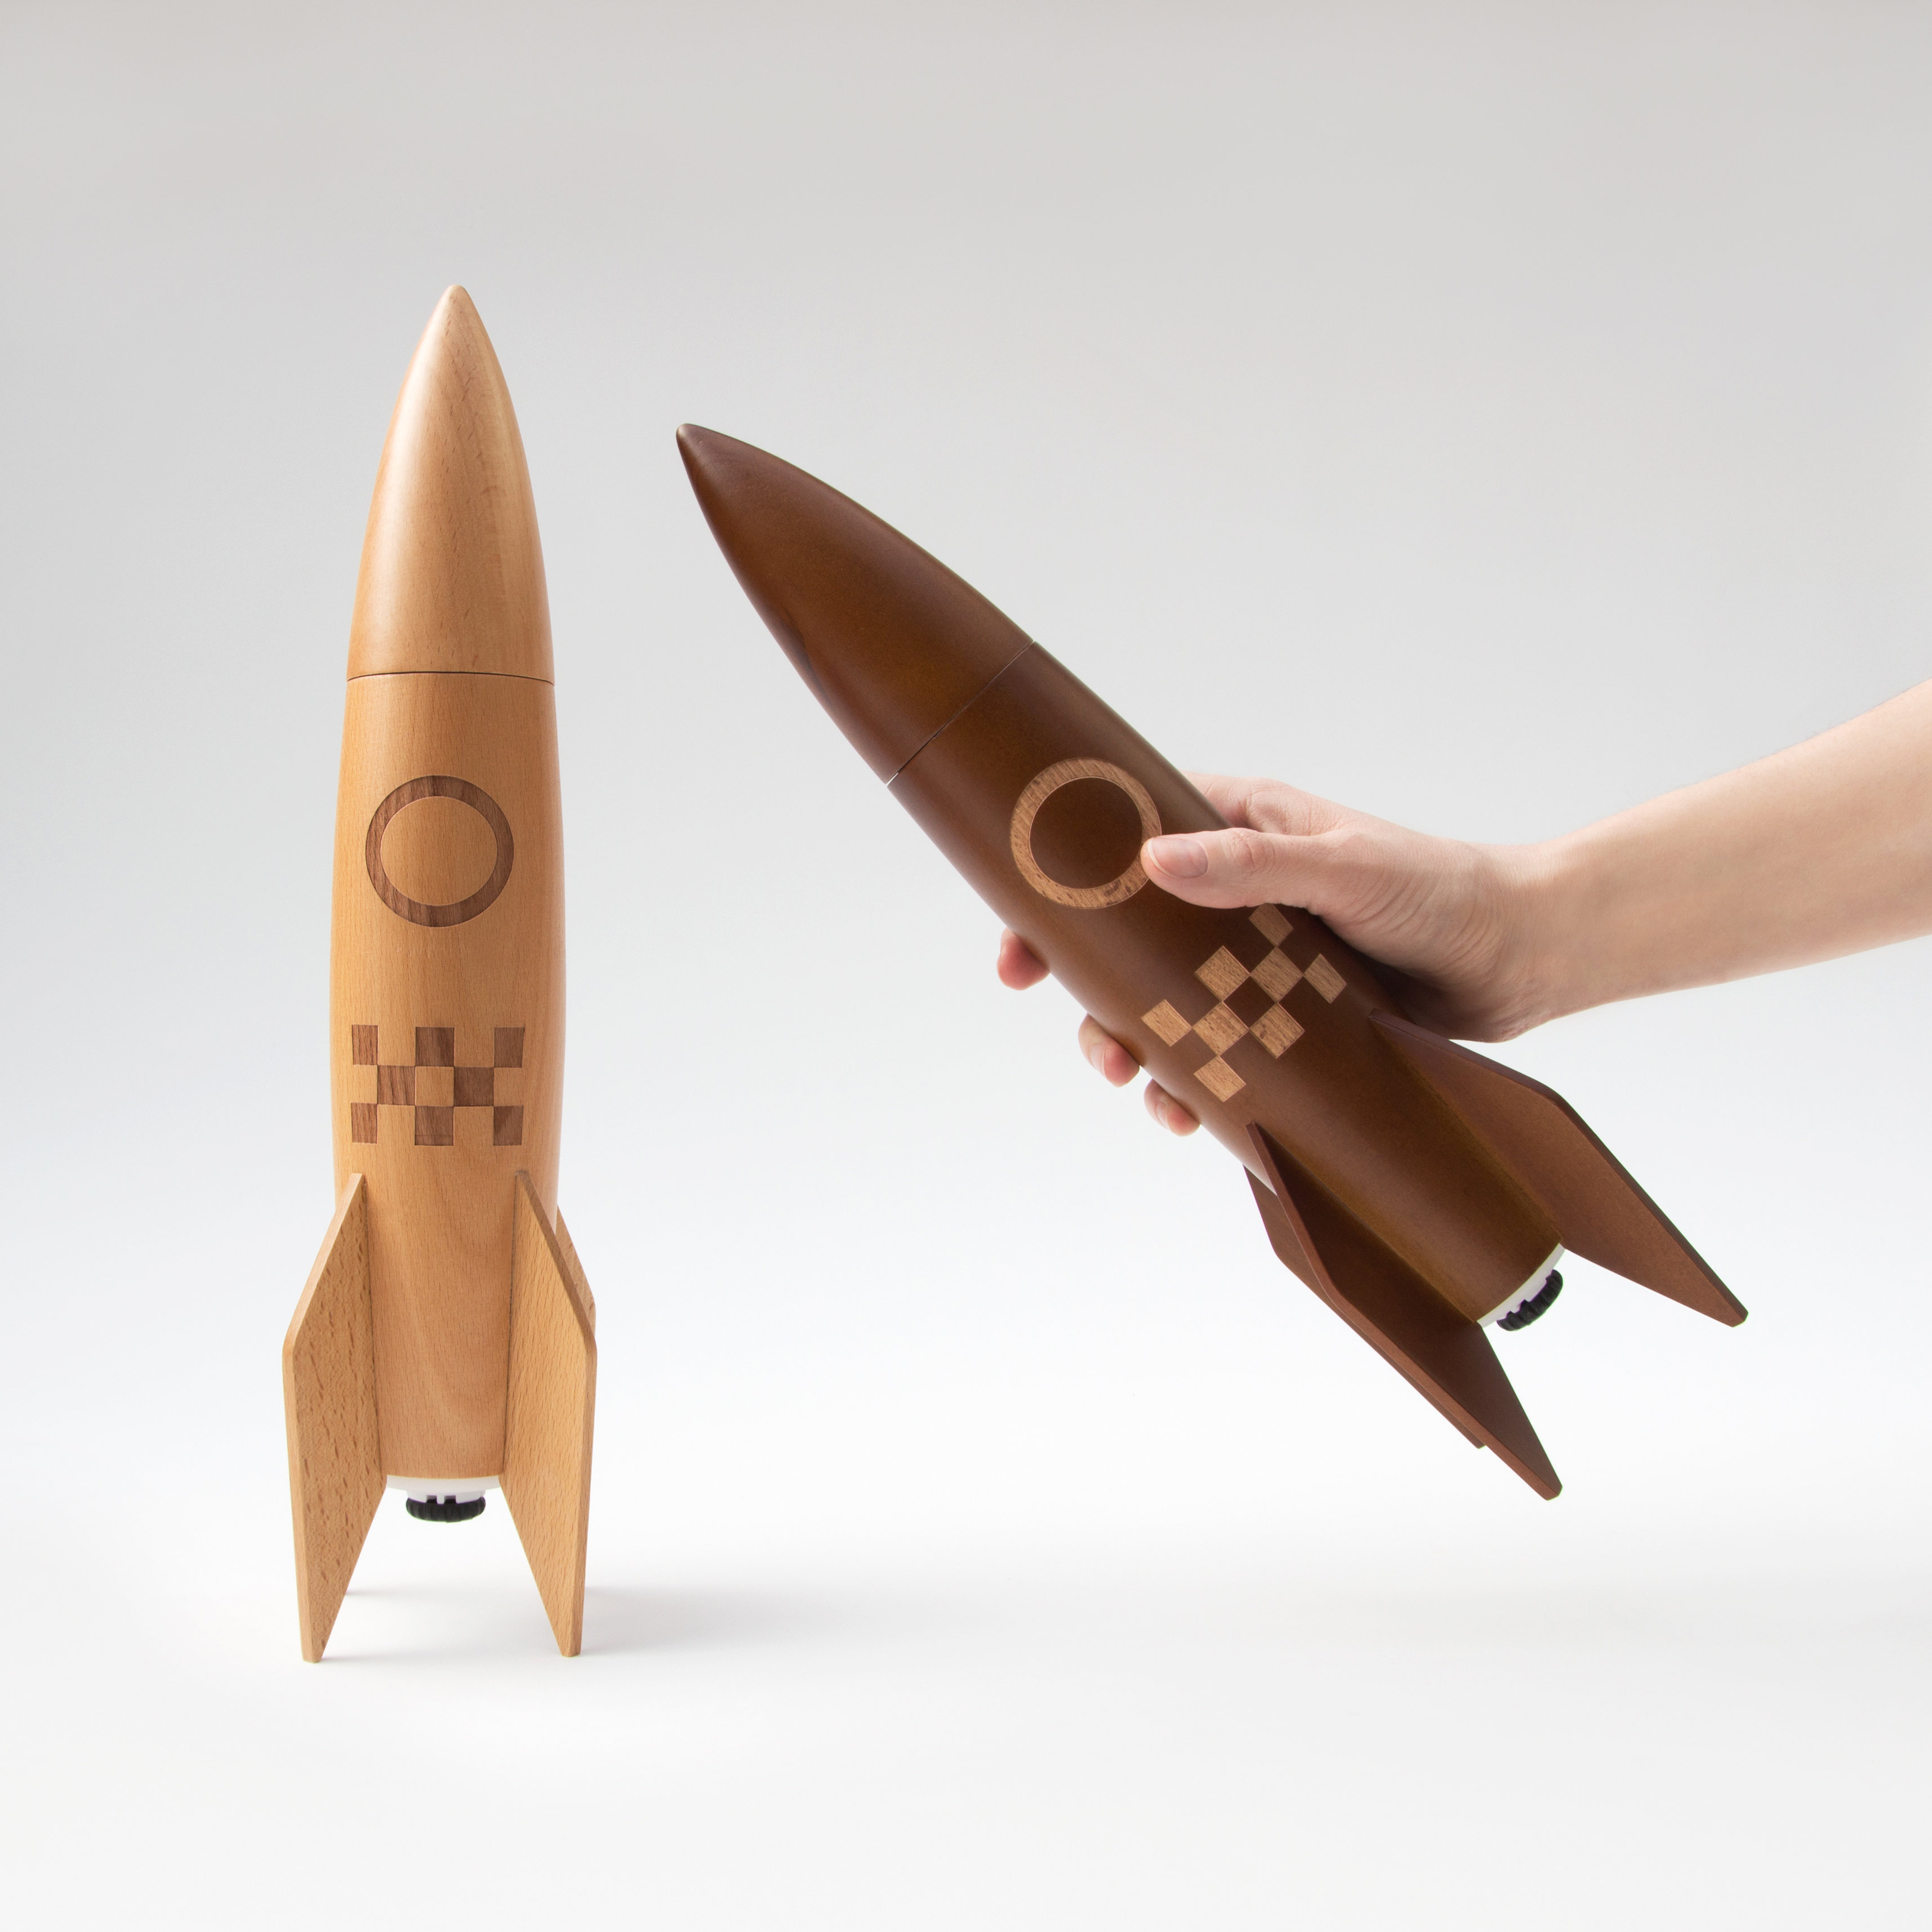 Wooden rocket salt and pepper mills with one in hand